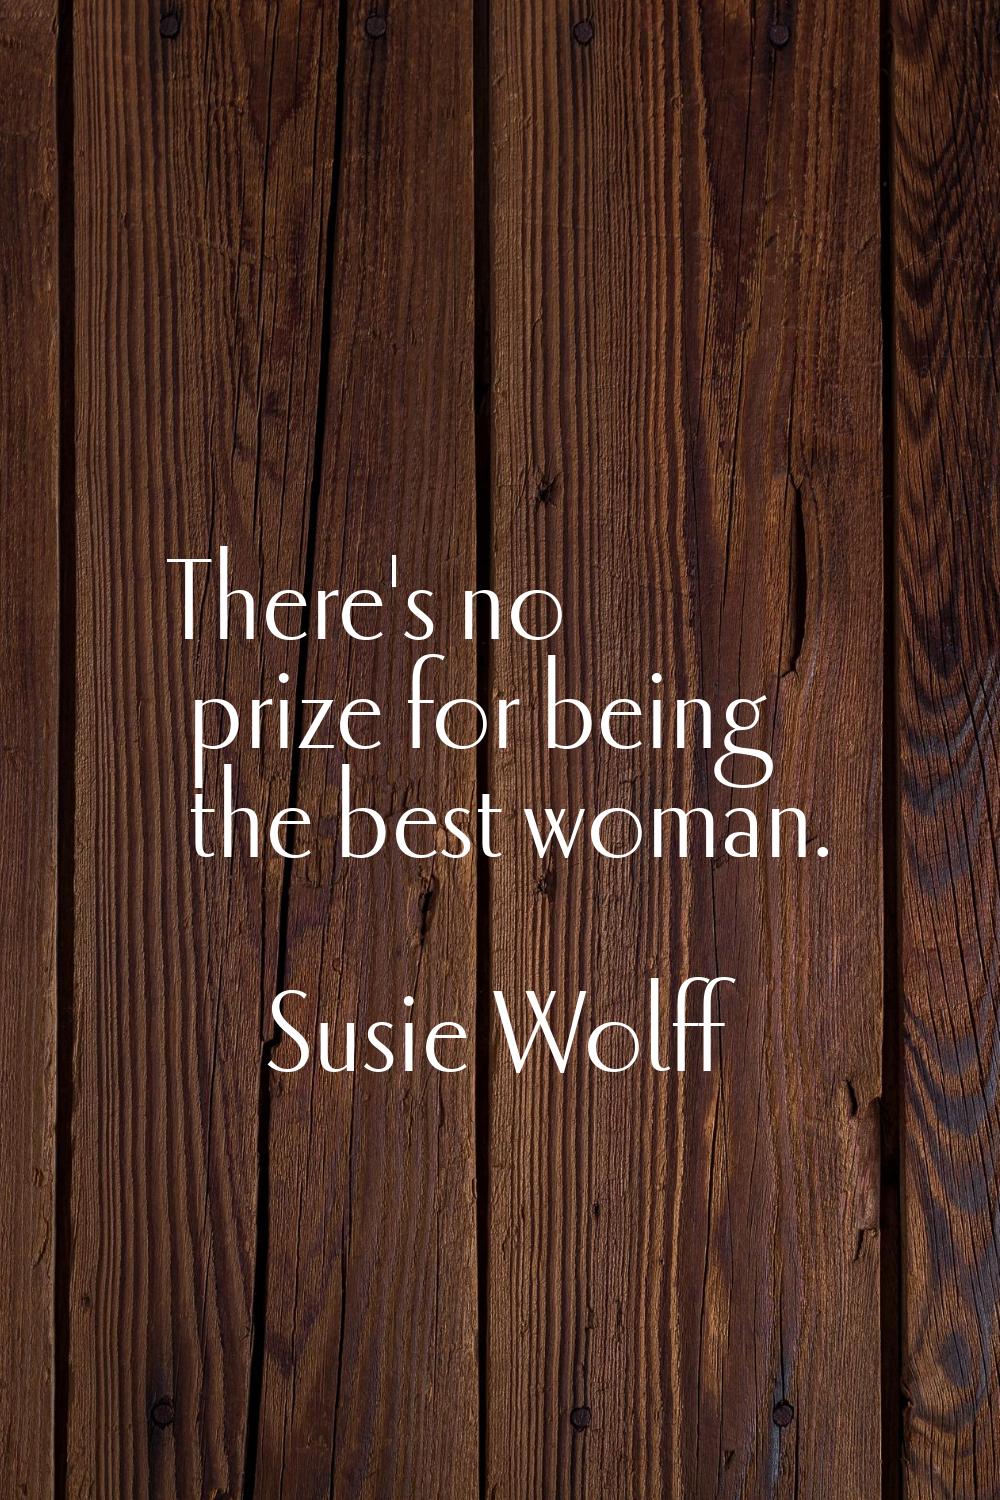 There's no prize for being the best woman.